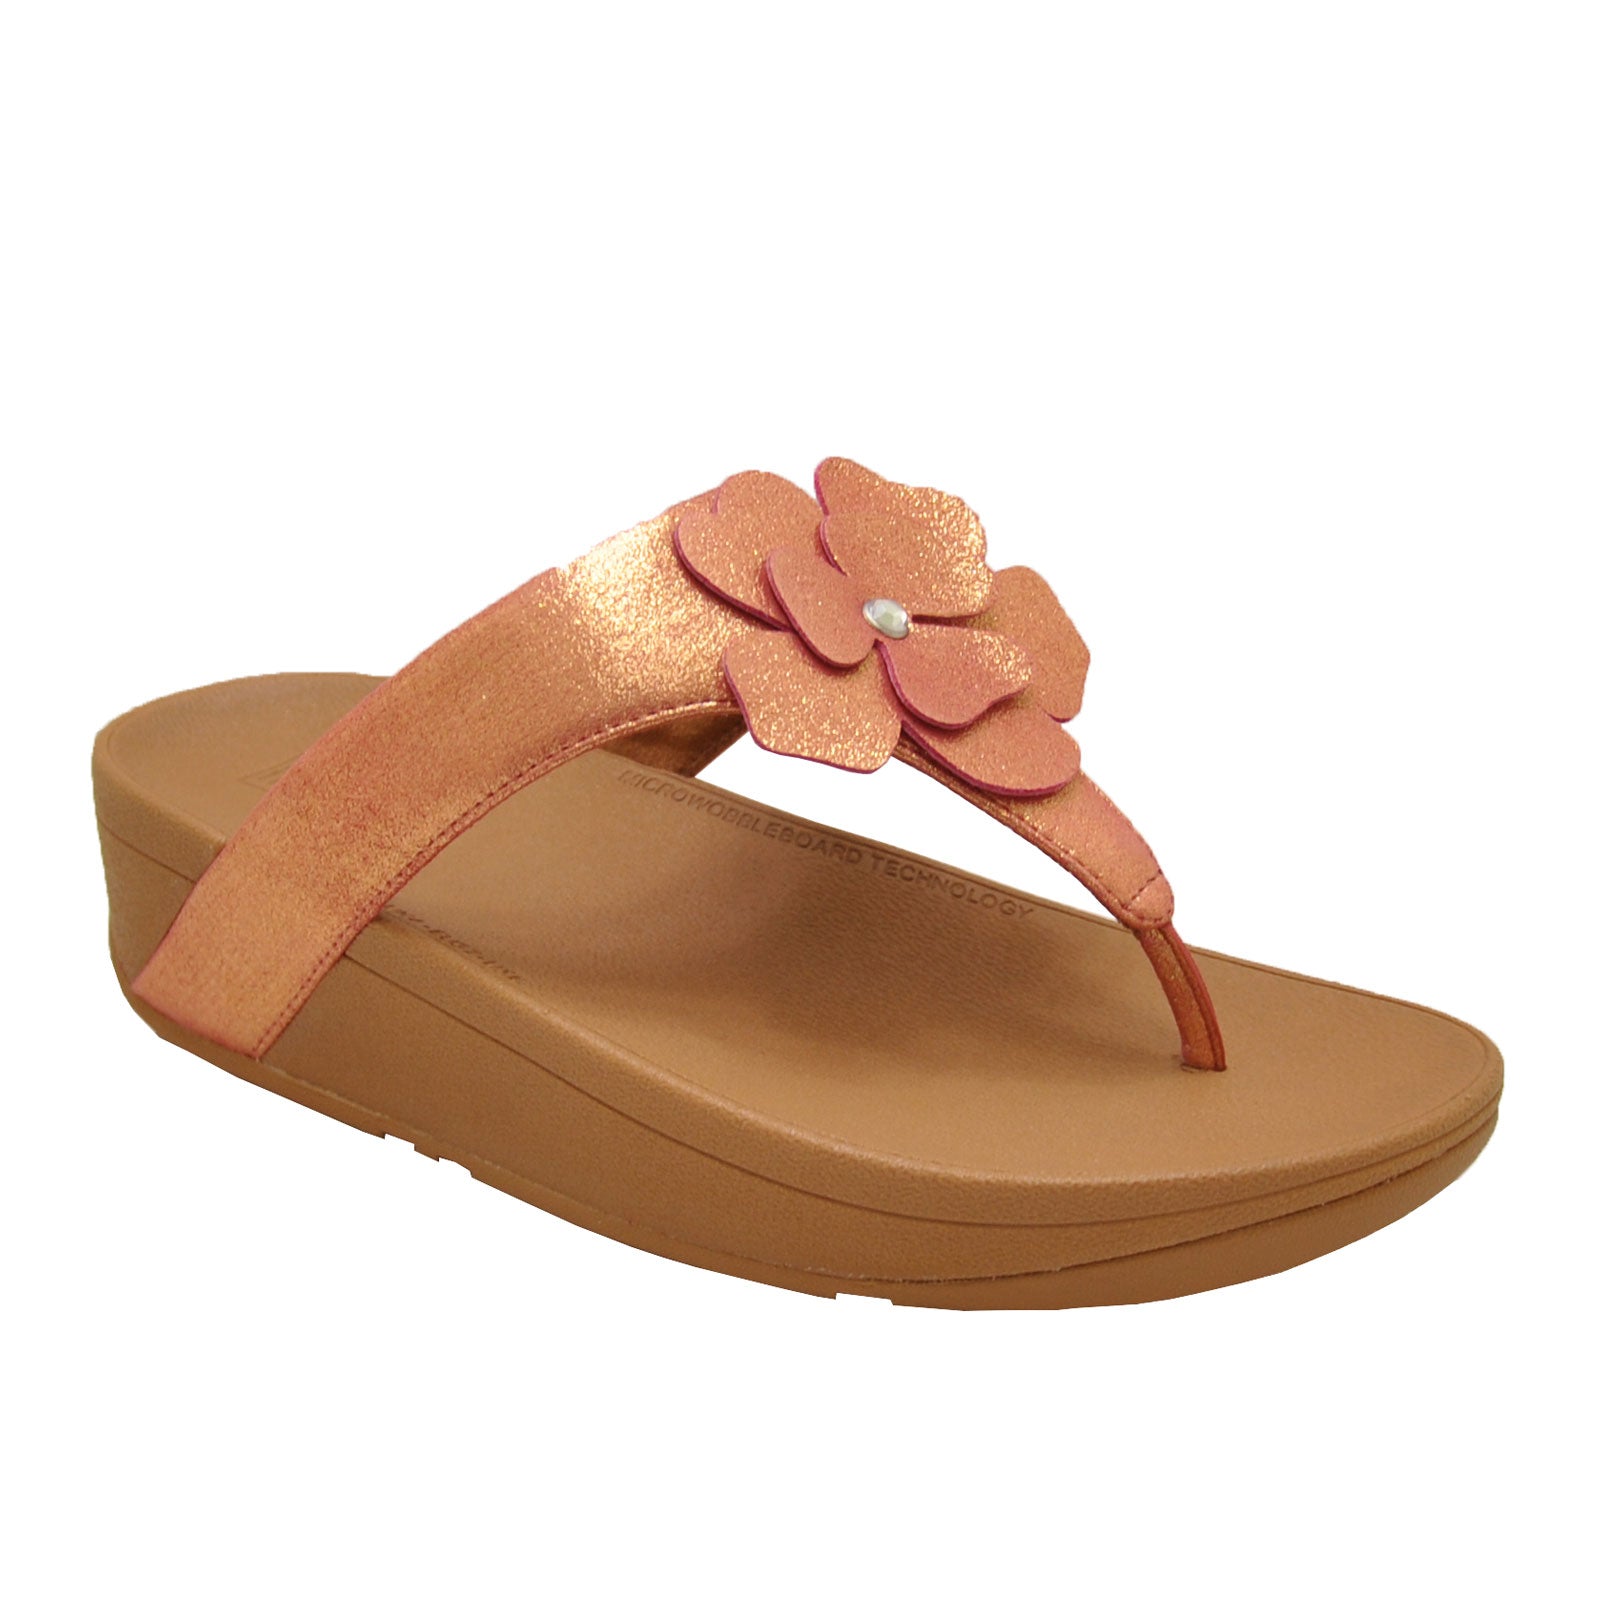 FitFlop Lottie Corsage Toe-Thong BF2-802